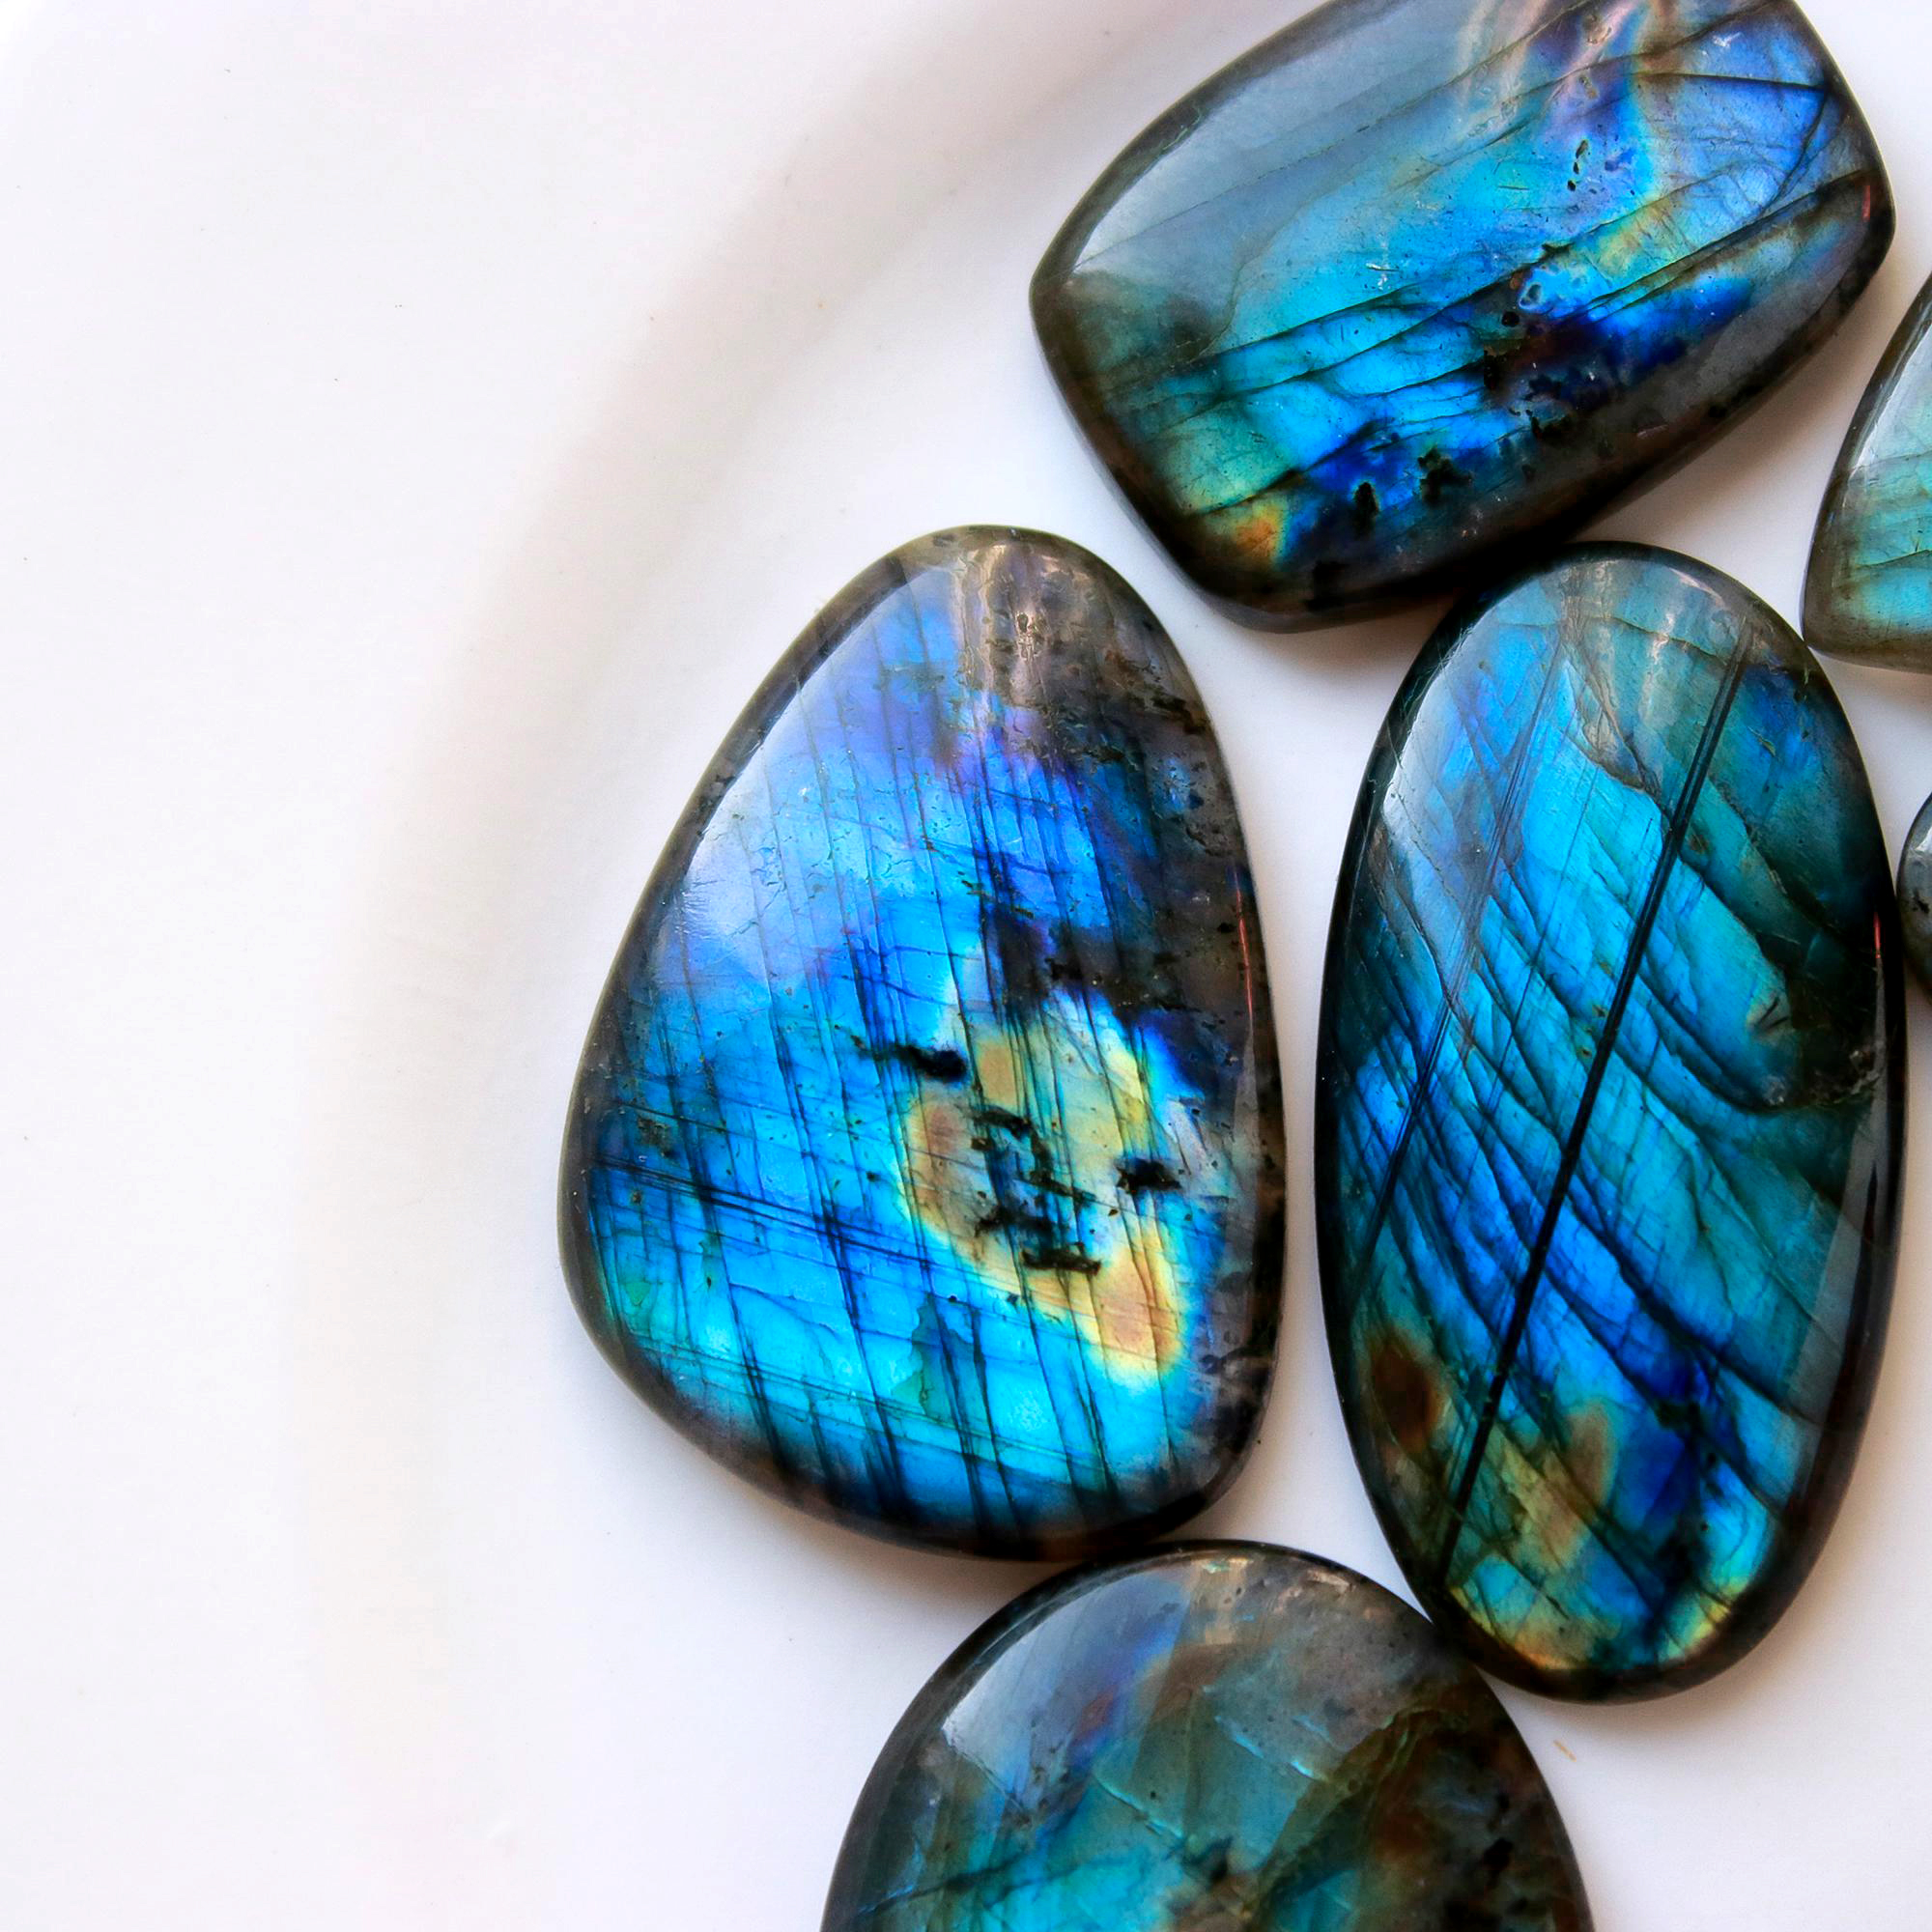 8 Pcs.387 Cts Natural labradorite Cabochon Loose Gemstone For Jewelry Wholesale Lot Size 43x25 31x22mm#1113